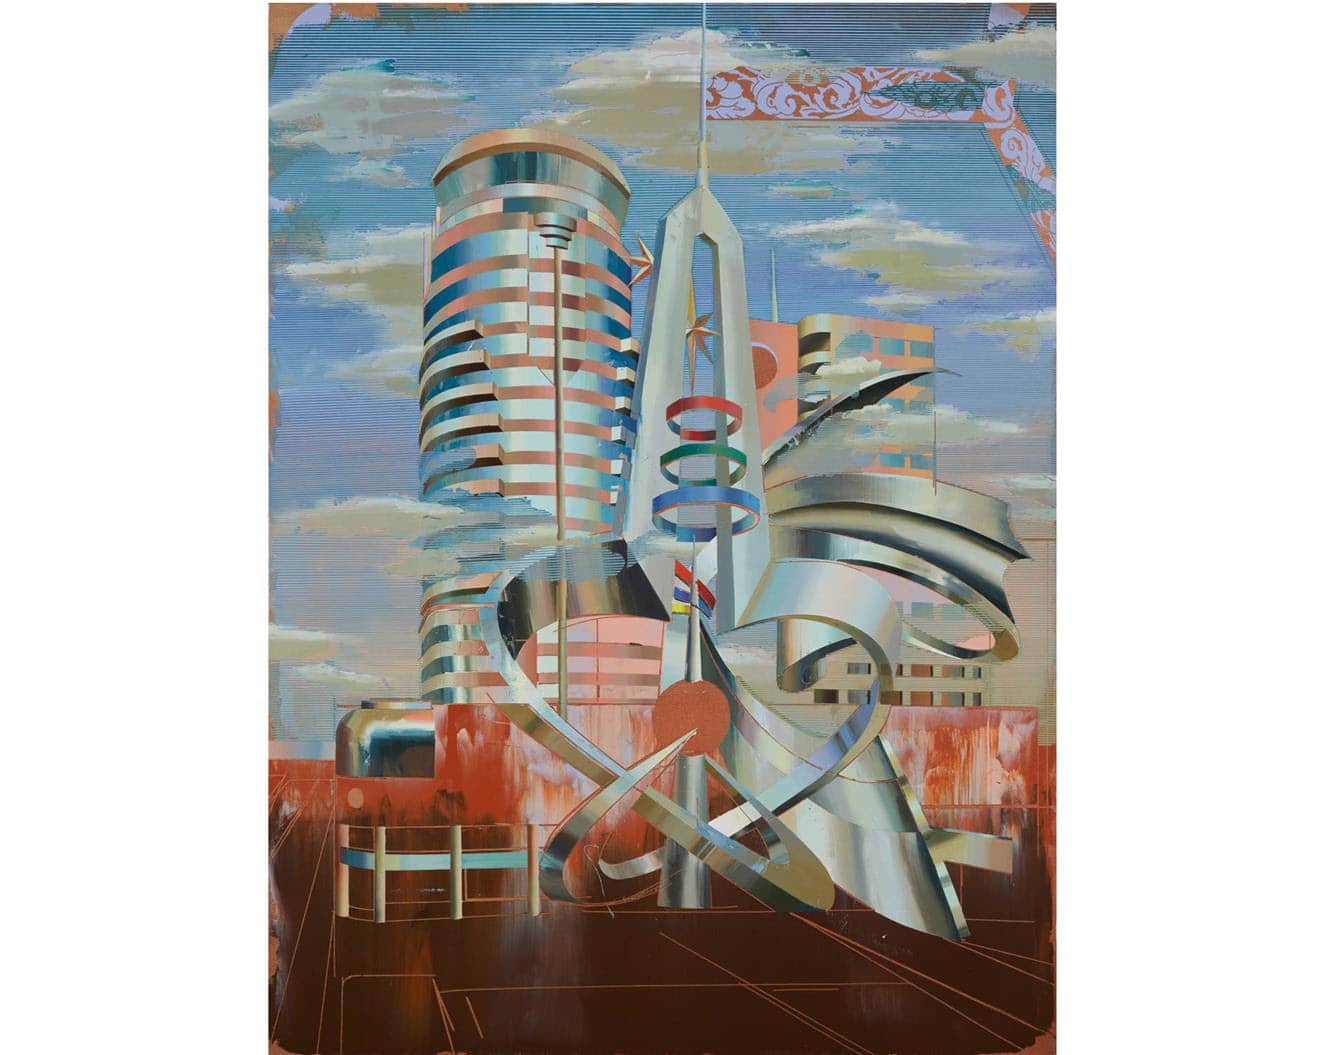 Cui Jie, Jianmei Department Store, Kaohsiung, 2020. Acrylic and oil on canvas, 78 3/4 x 59 1/16 inches (200 x 150 cm).